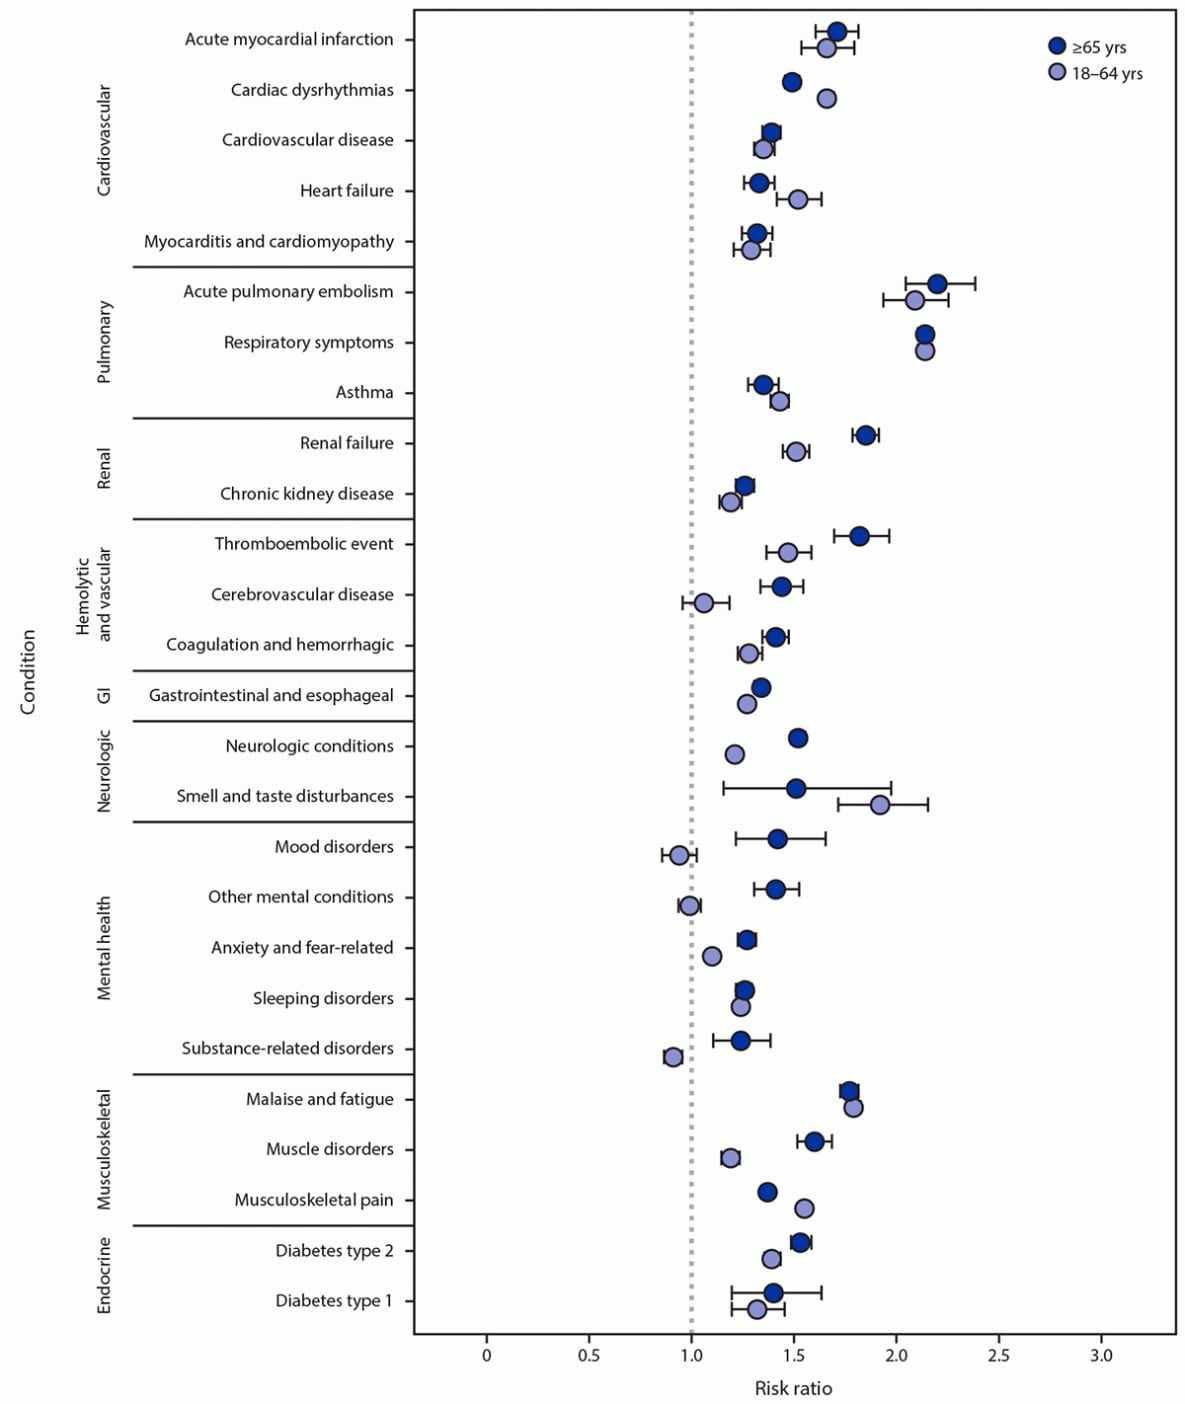 The figure is a forest plot showing the risk ratios for developing post-COVID-19 conditions among adults aged 18–64 years and ≥65 years, by condition in the United States during March 2020– November 2021.